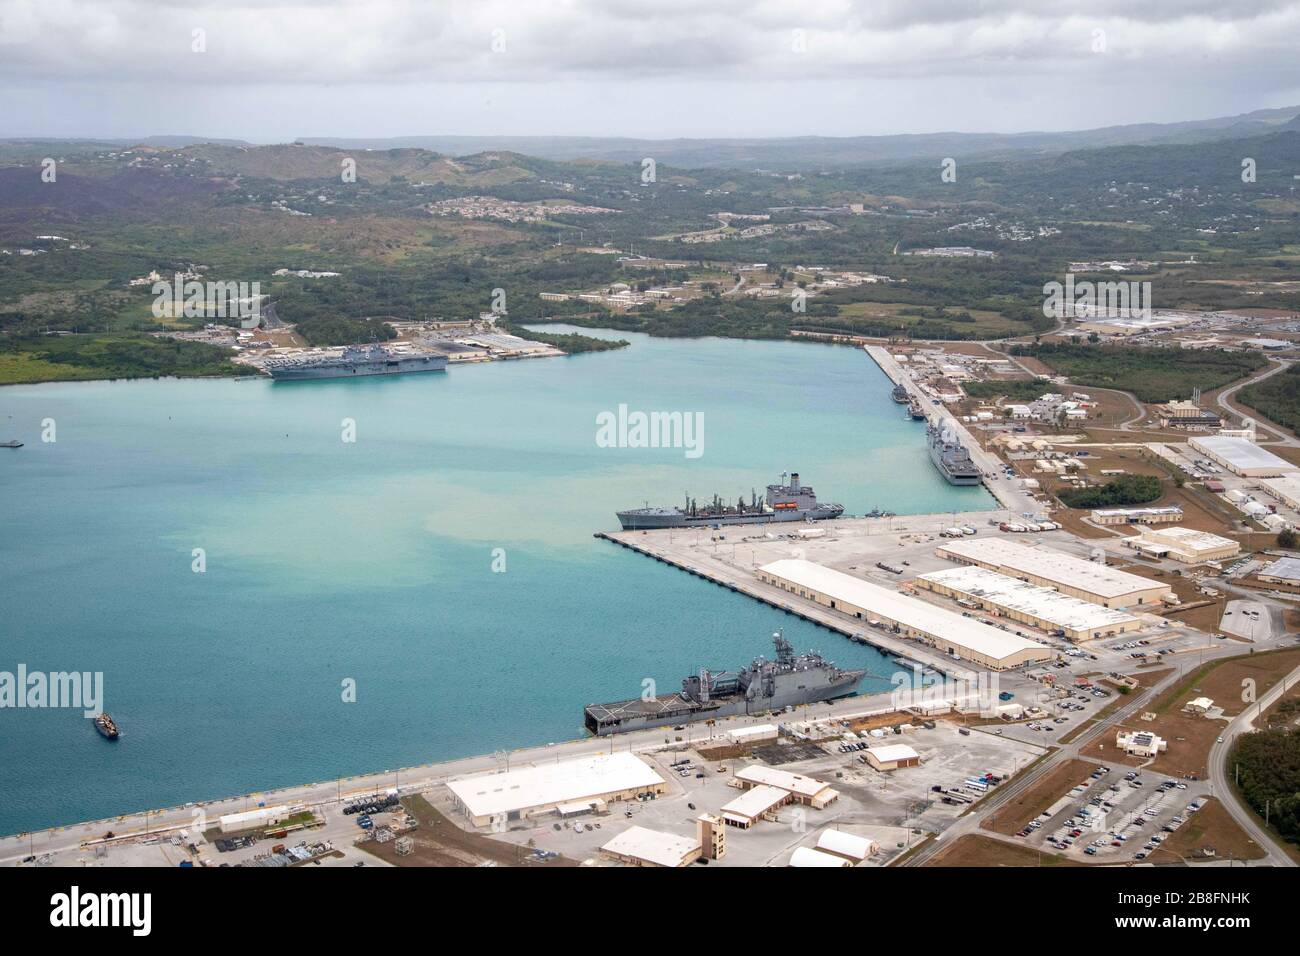 200321-N-RU810-1075 NAVAL BASE GUAM (March 21, 2020) Amphibious assault ship USS America (LHA 6), San Antonio-class dock landing ship USS Green Bay (LPD 20) and Whidbey Island-class dock landing ship USS Germantown (LSD 42), all part of the America Expeditionary Strike Group, operate from Naval Base Guam with USNS Rappahannock (T-AO 204). Operating in the U.S. 7th Fleet area of operations, the America ESG-31st Marine Expeditionary Unit team of 4,500 Sailors and Marines is prepared to conduct missions across the full spectrum of military operations. (U.S. Navy photo by Mass Communication Specia Stock Photo